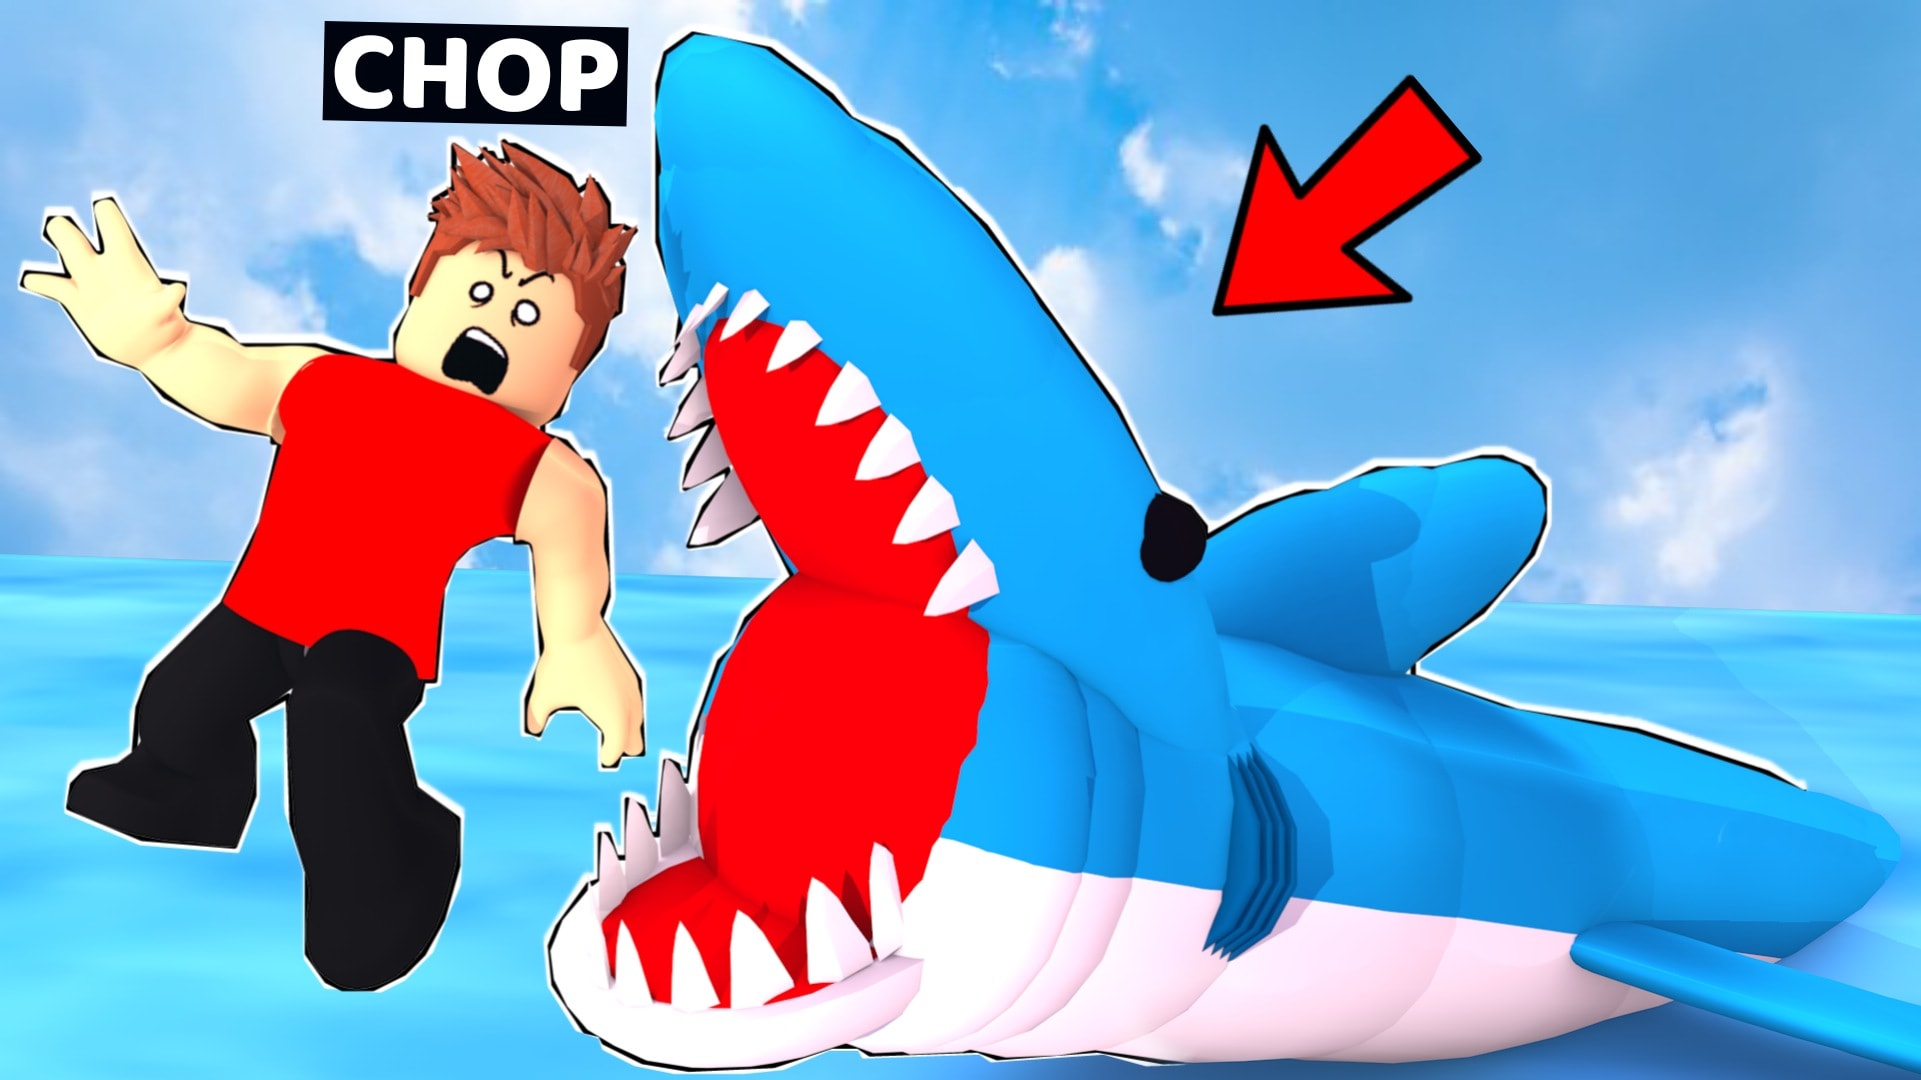 Make a professional roblox thumbnail by Hccorporation